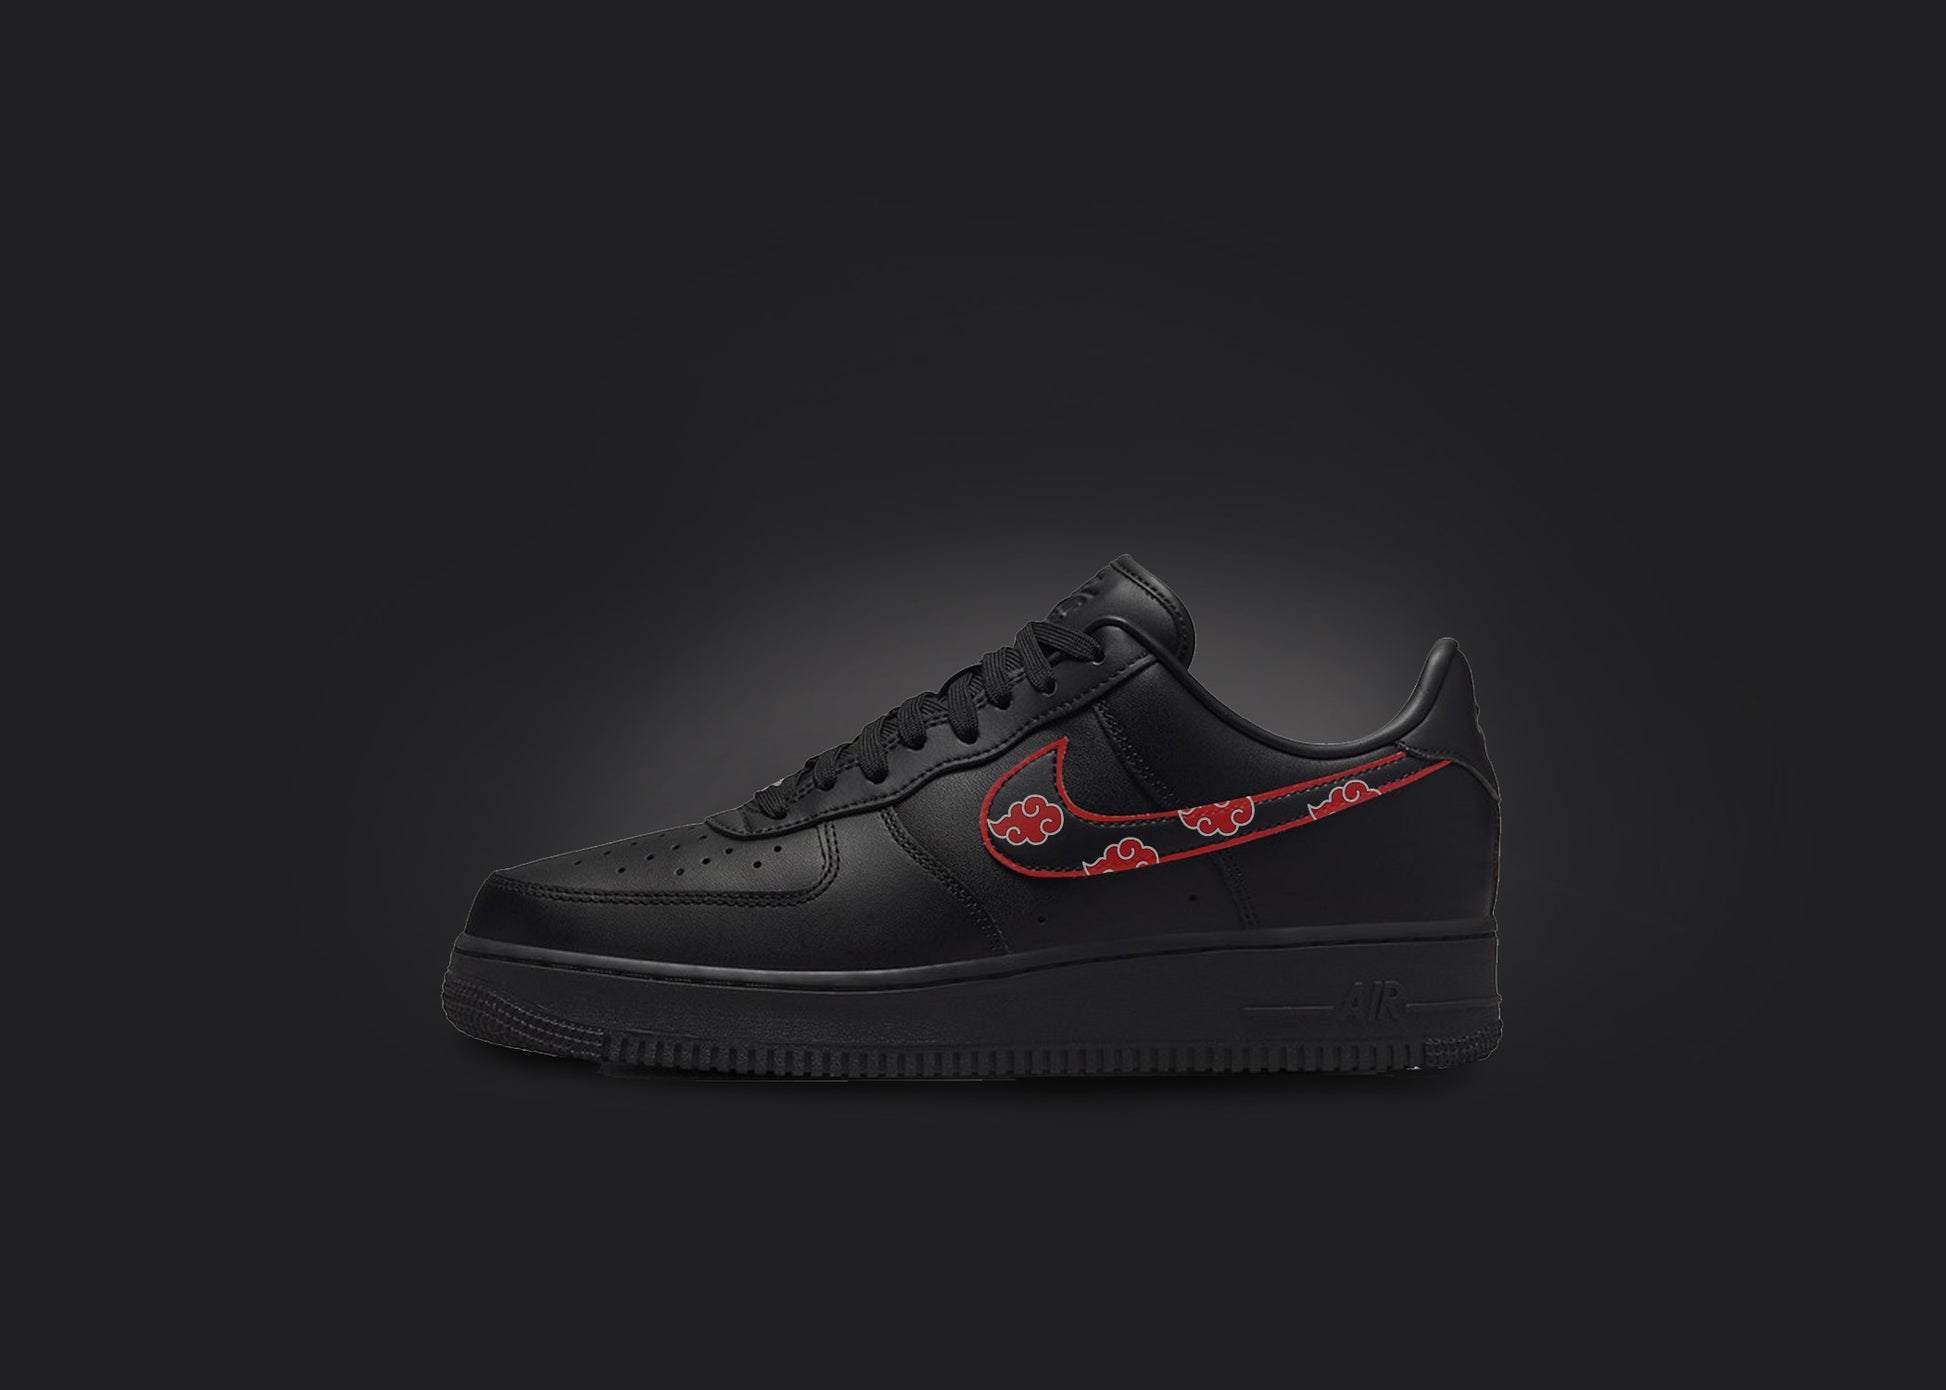 The image is featuring a custom black Air force 1 sneaker on a blank black background. The black nike sneaker has a custom itachi clouds design on the nike logo. 